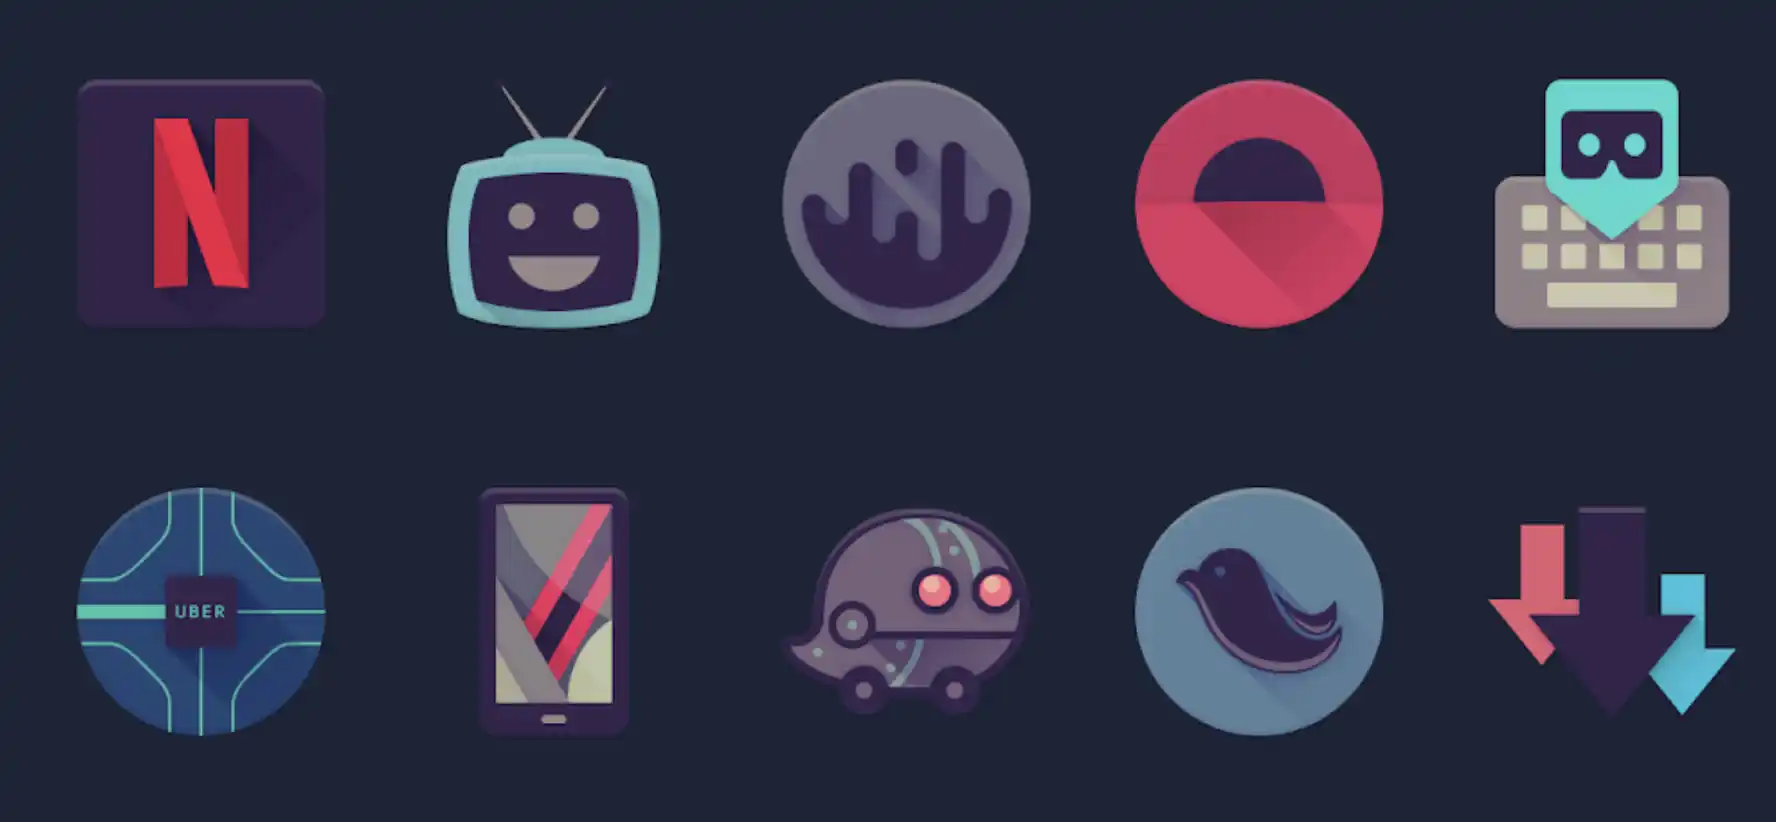 13 Best Icon Packs For Android To Get Simple and Clean UI